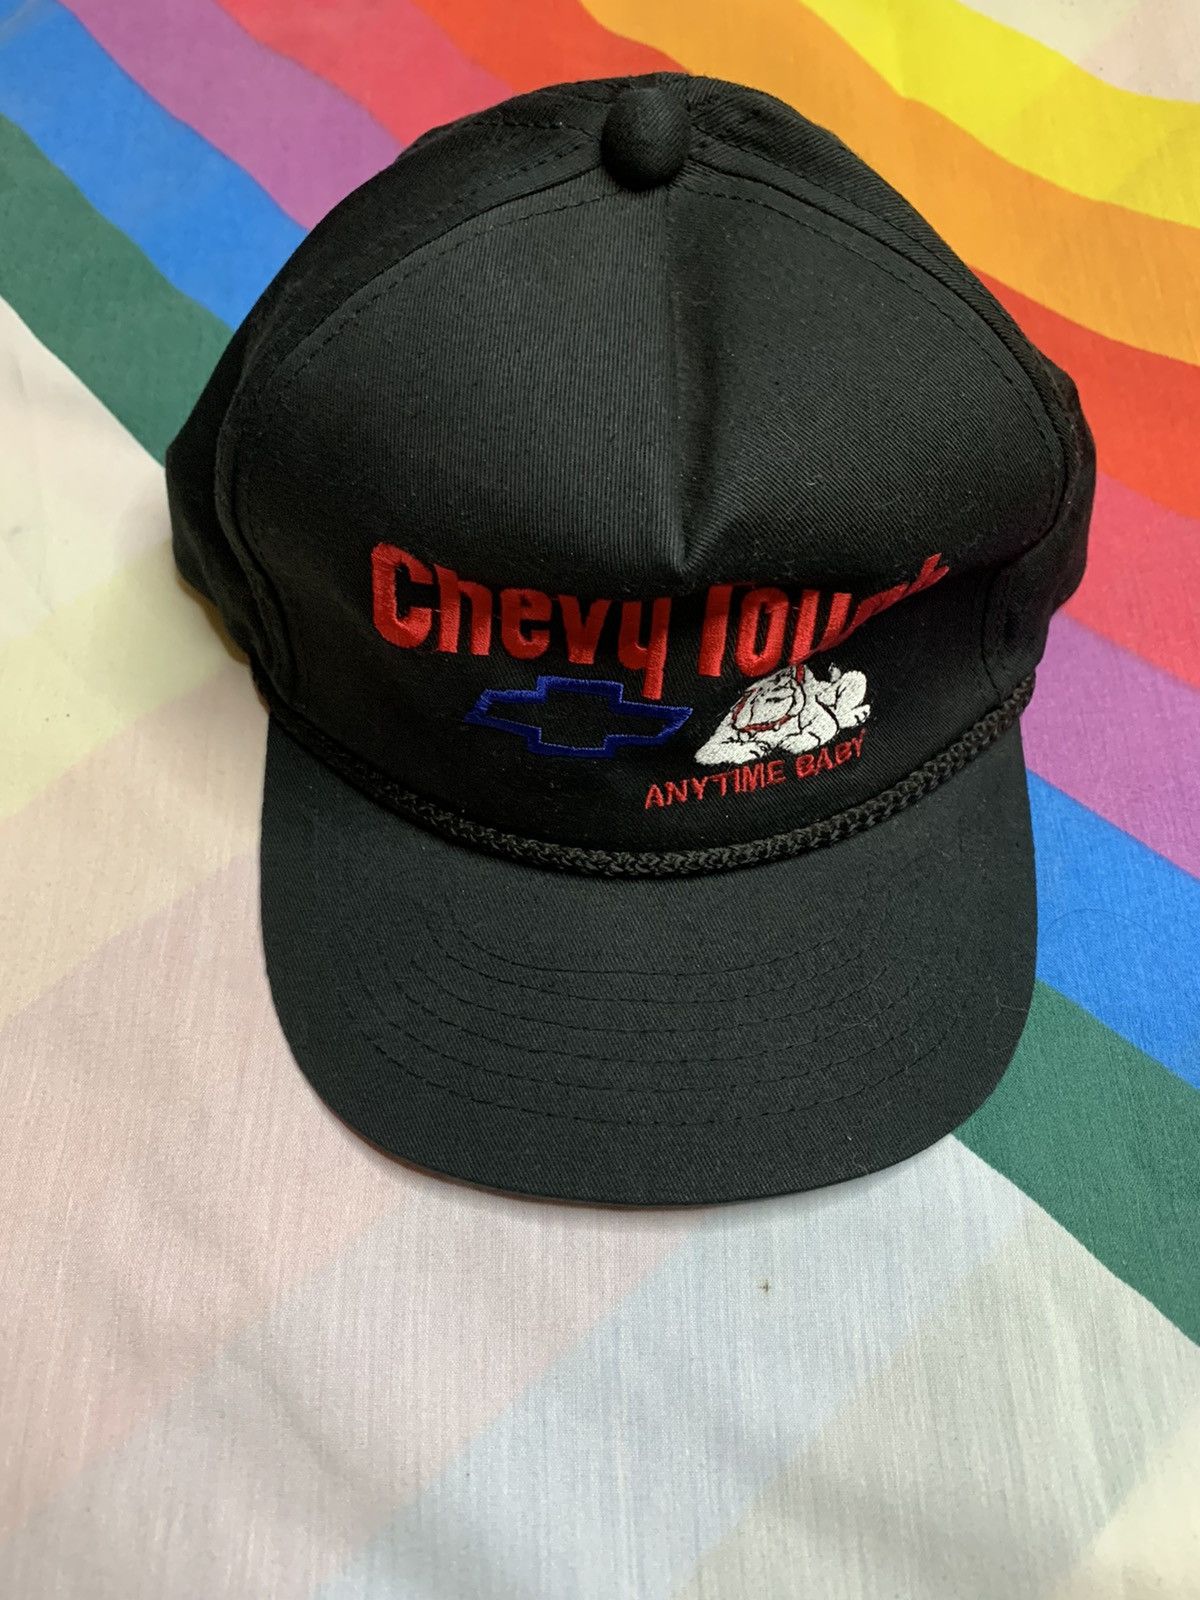 Vintage Vintage Chevy tough anytime baby hat | Grailed